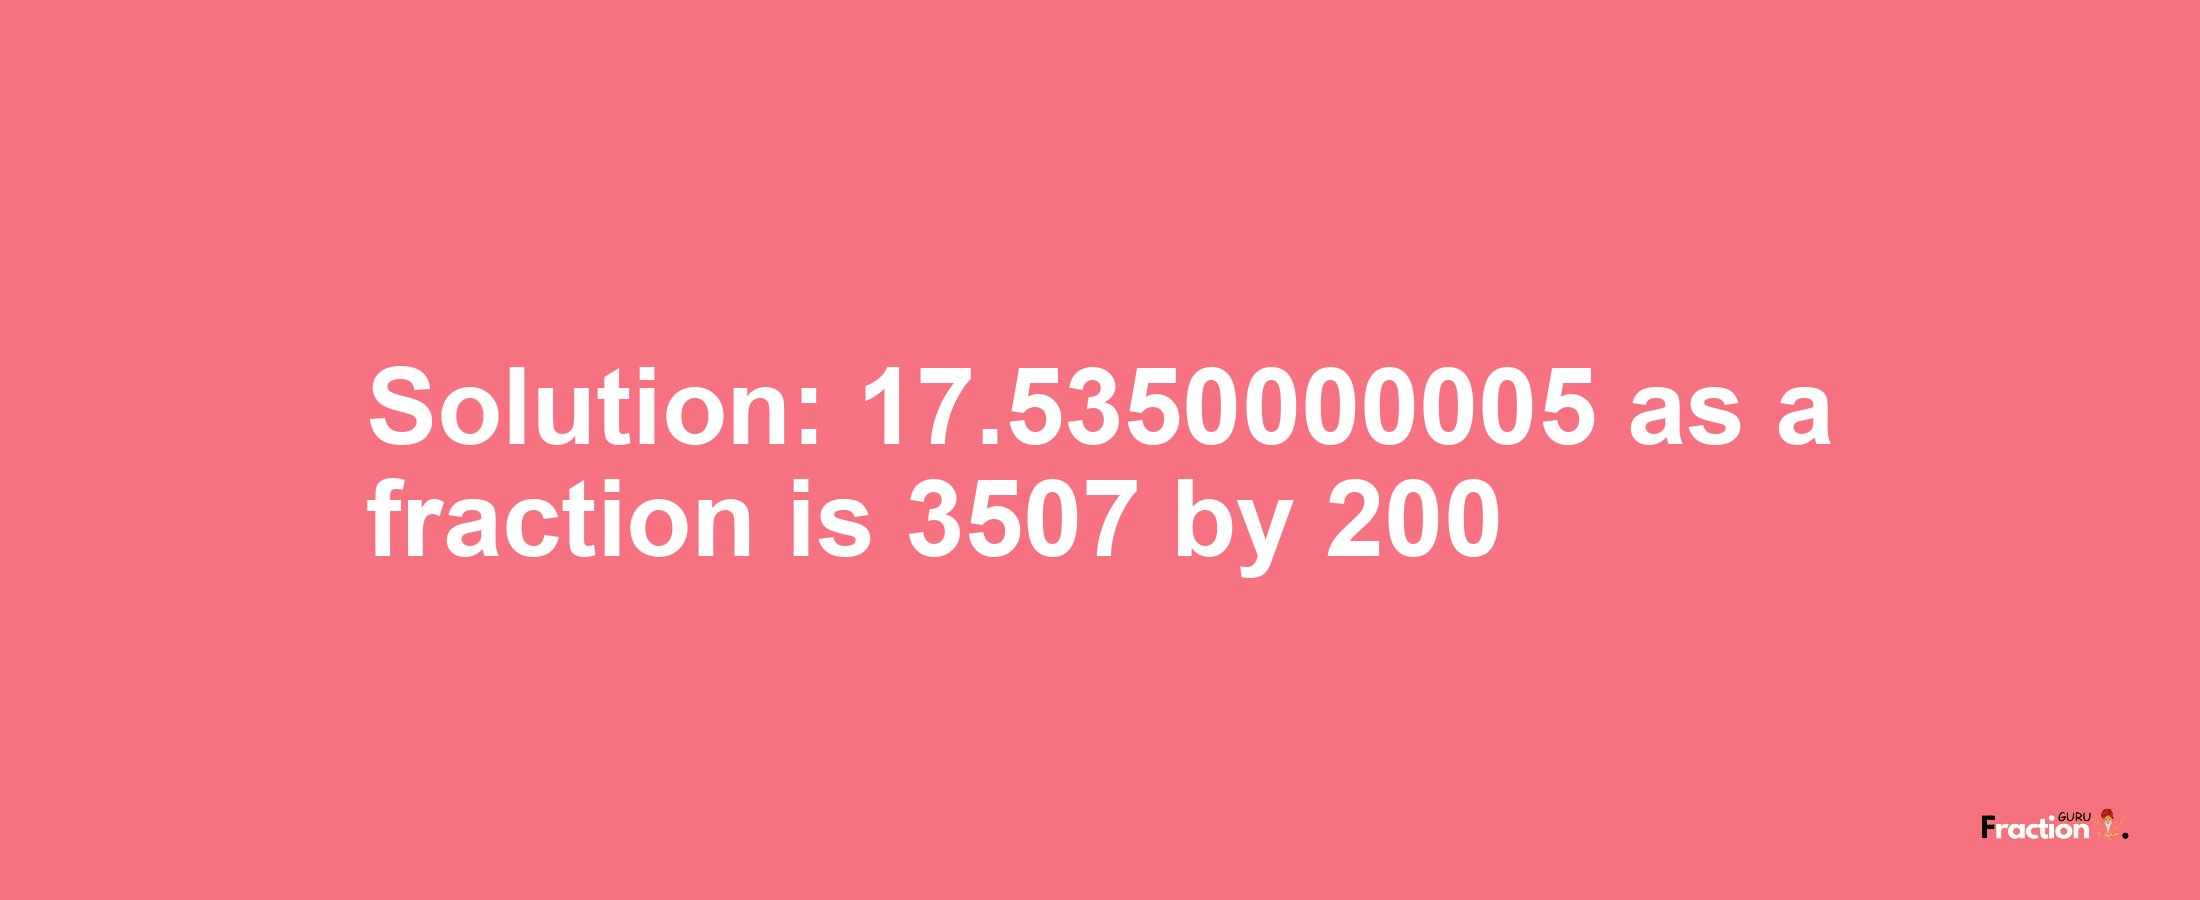 Solution:17.5350000005 as a fraction is 3507/200